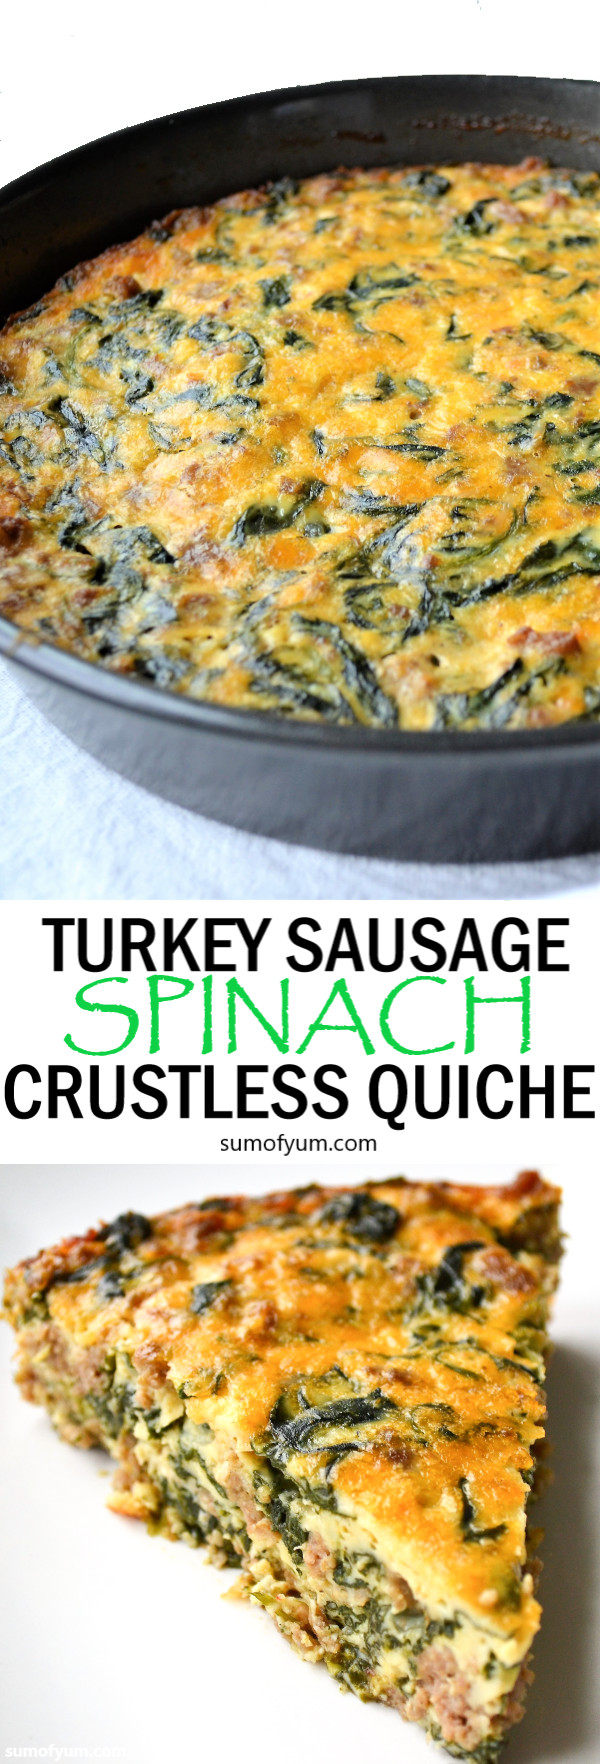 Turkey Sausage Recipes Low Carb
 Turkey Sausage and Spinach Crustless Quiche This savory